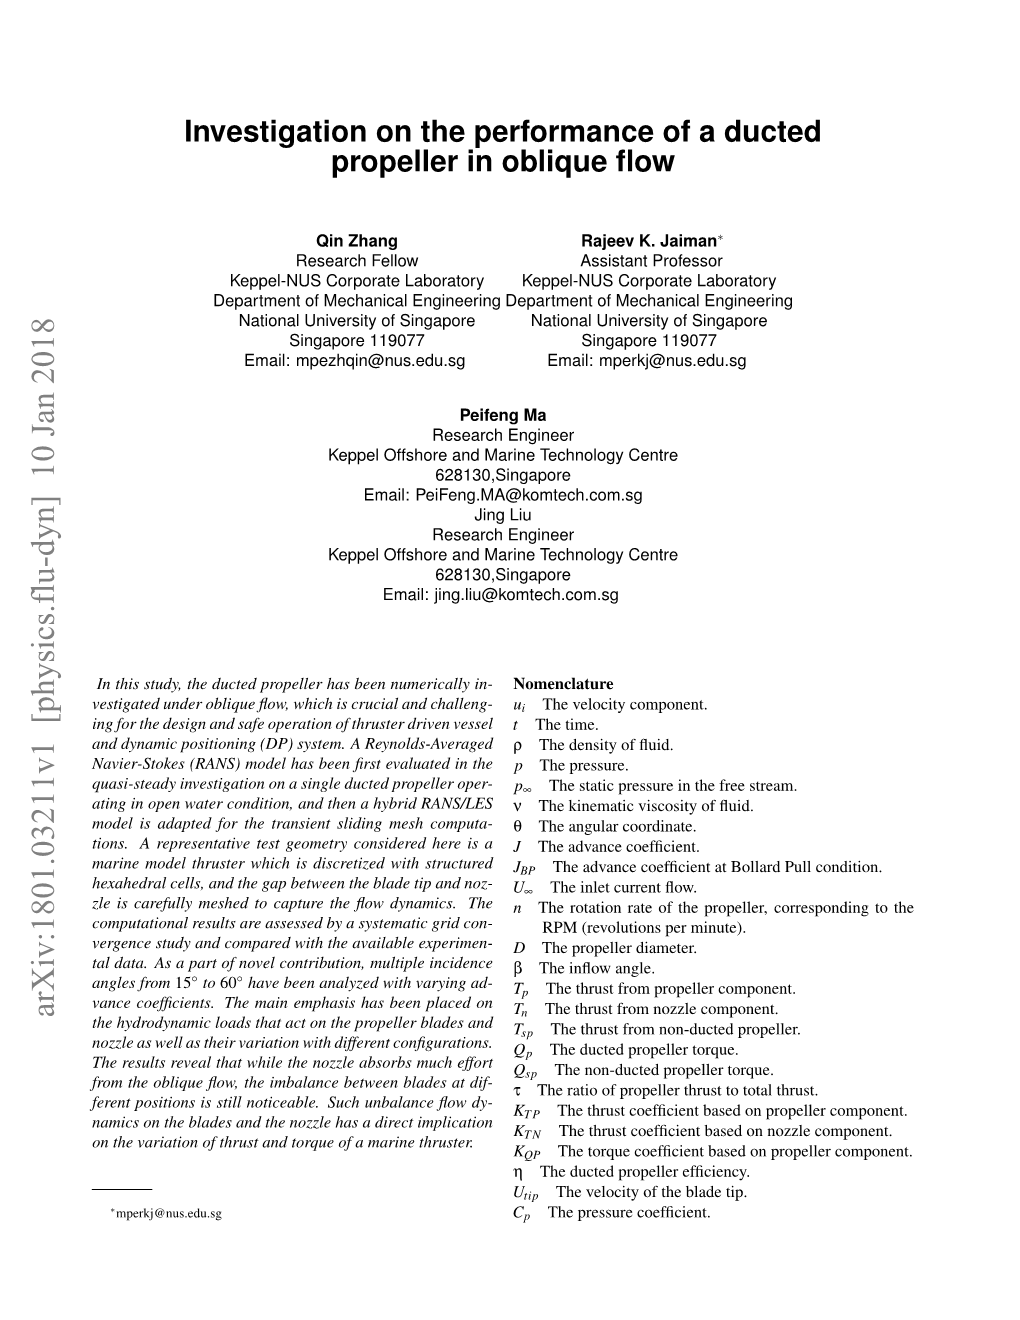 Investigation on the Performance of a Ducted Propeller in Oblique Flow